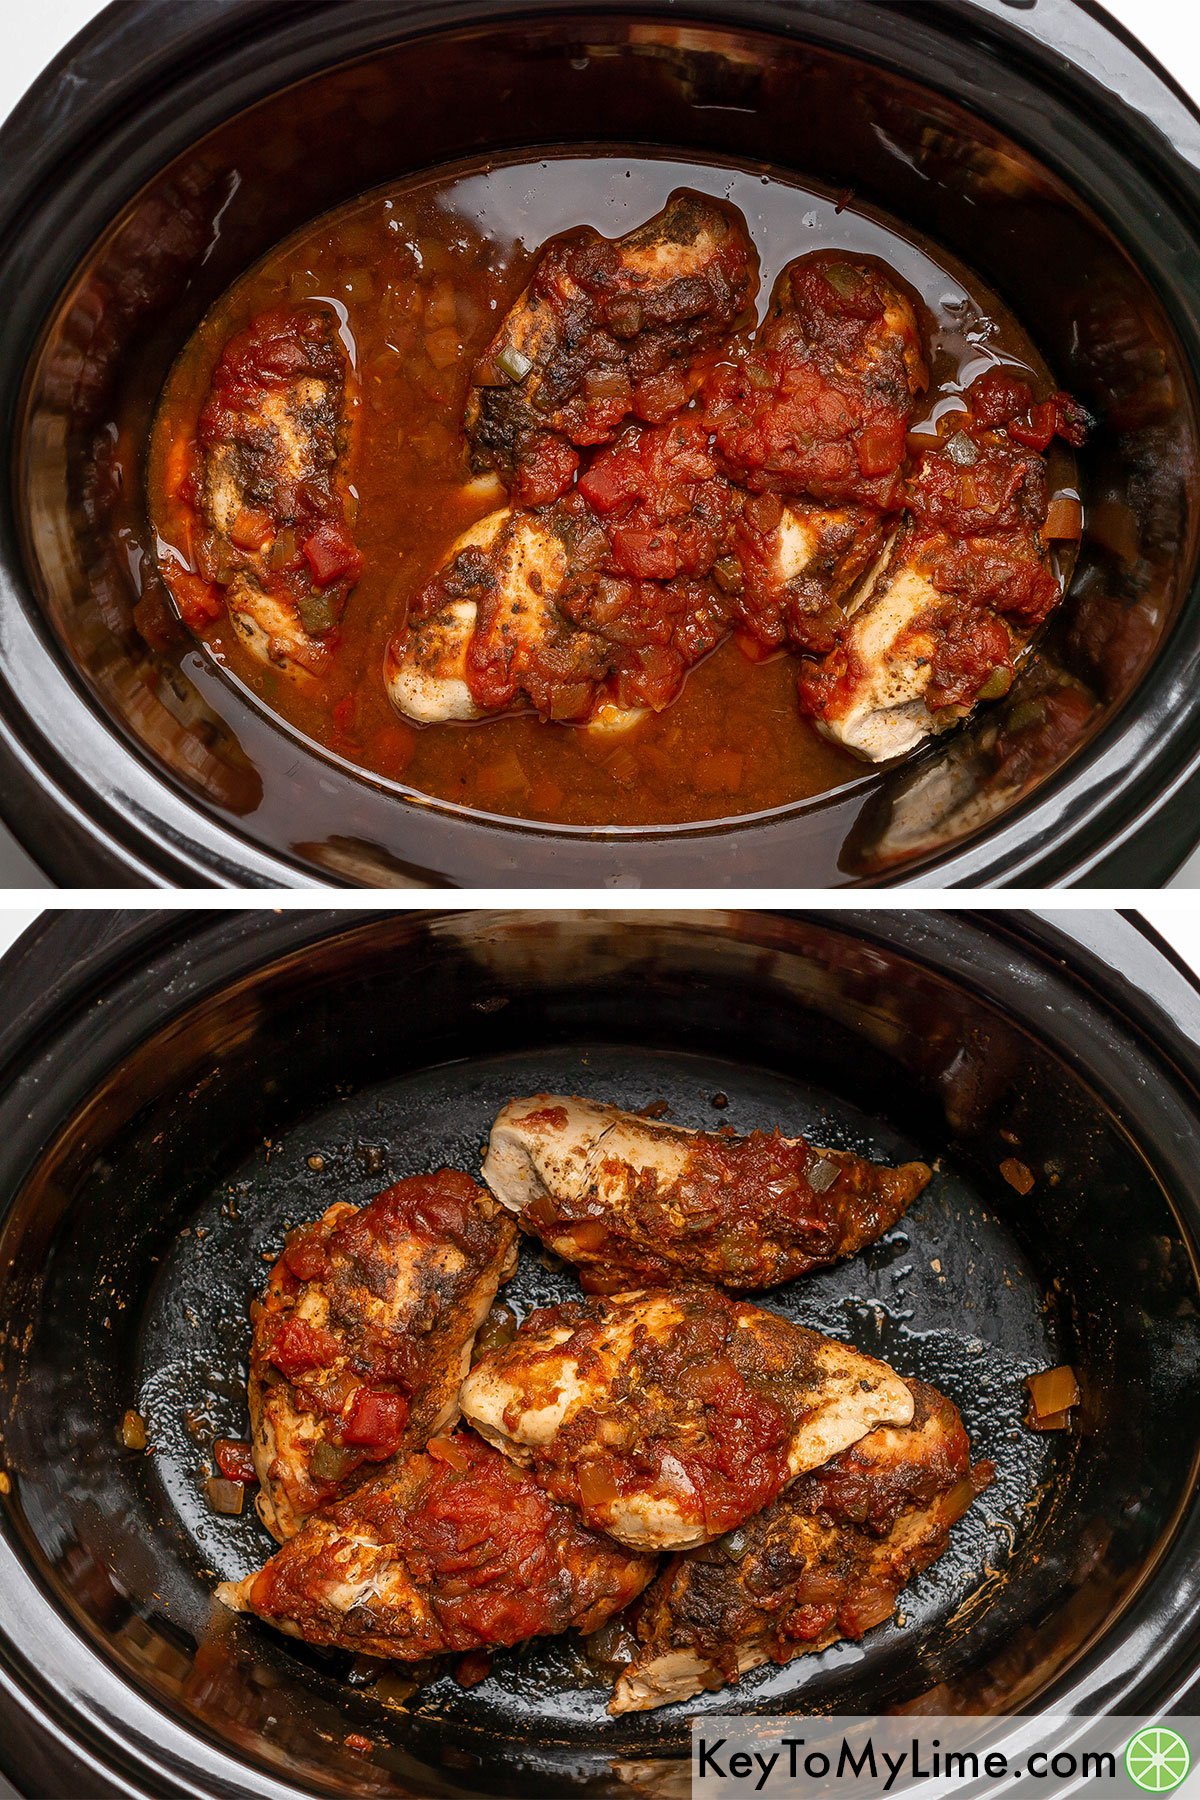 Draining the cooking liquid from the slow cooker, then returning the chicken breasts back to the slow cooker.